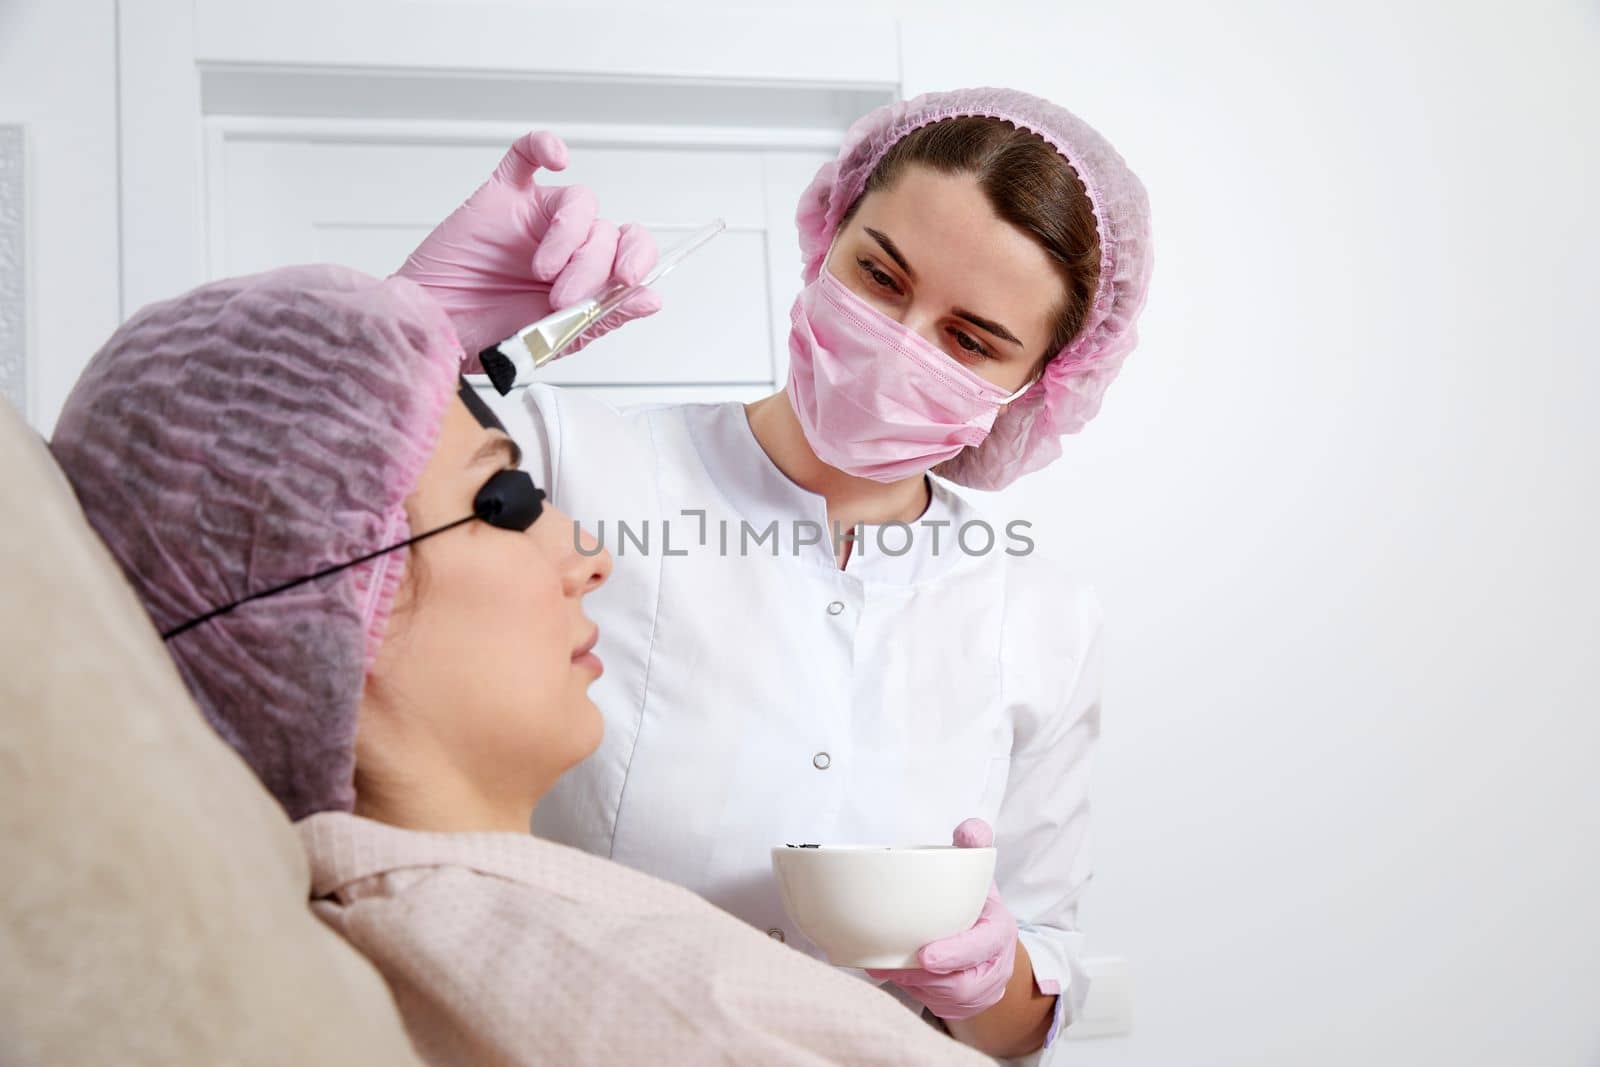 Carbon peeling in beauty salon. Cosmetologist applying black mask on the face of a beautiful woman for carbon peeling by Mariakray